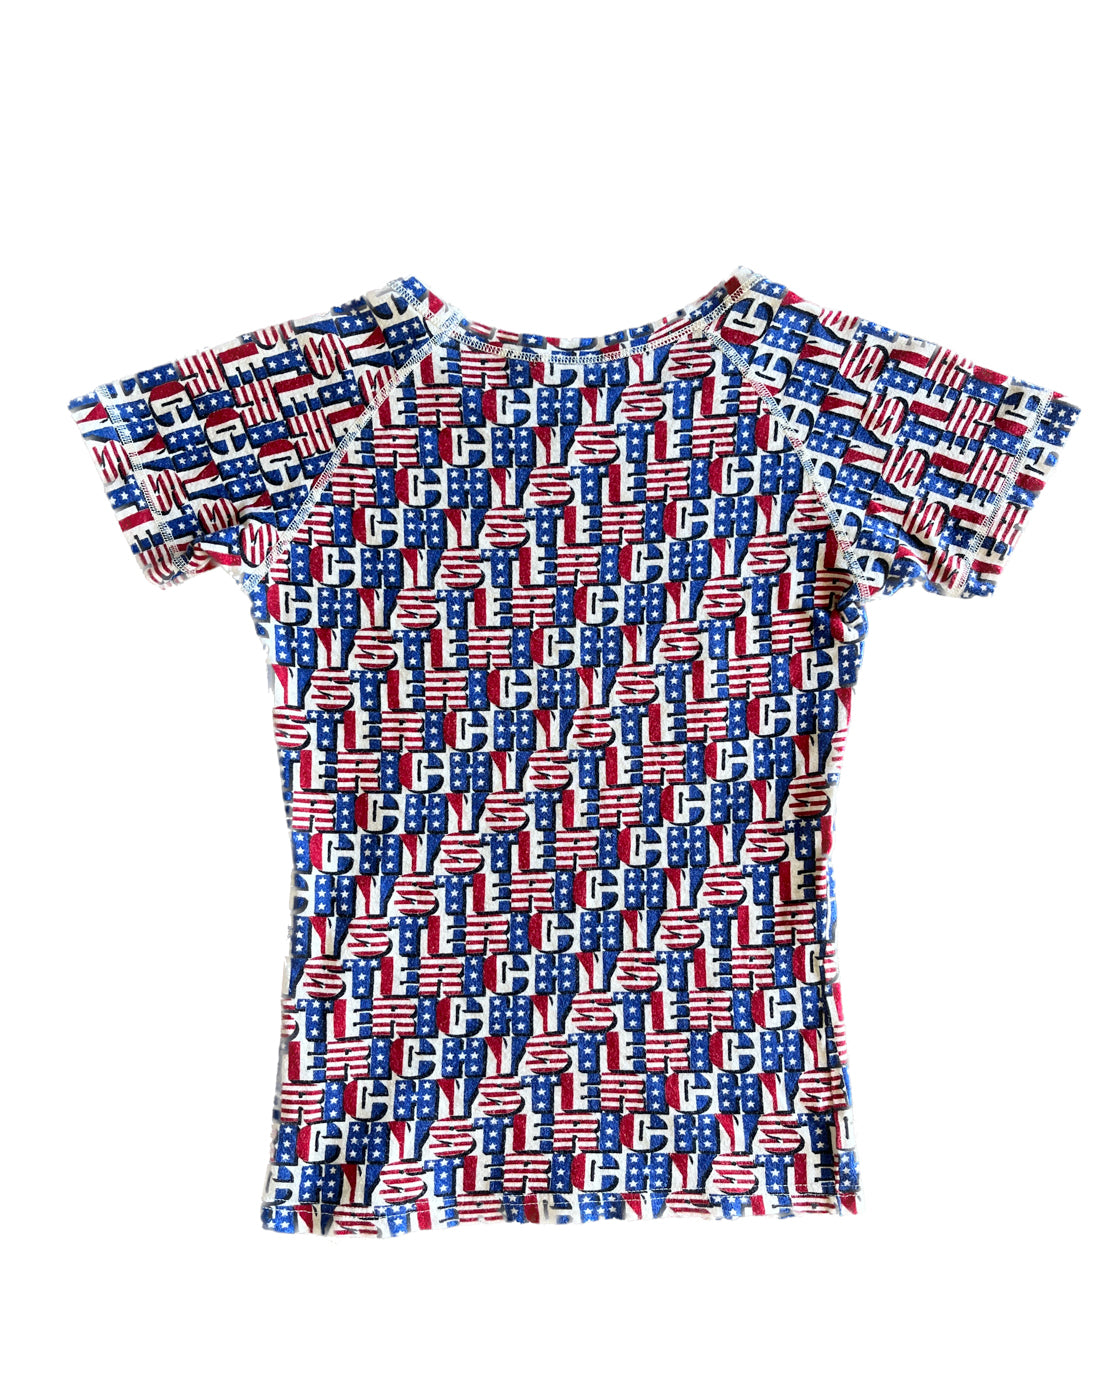 All-over Print Graphic Tee